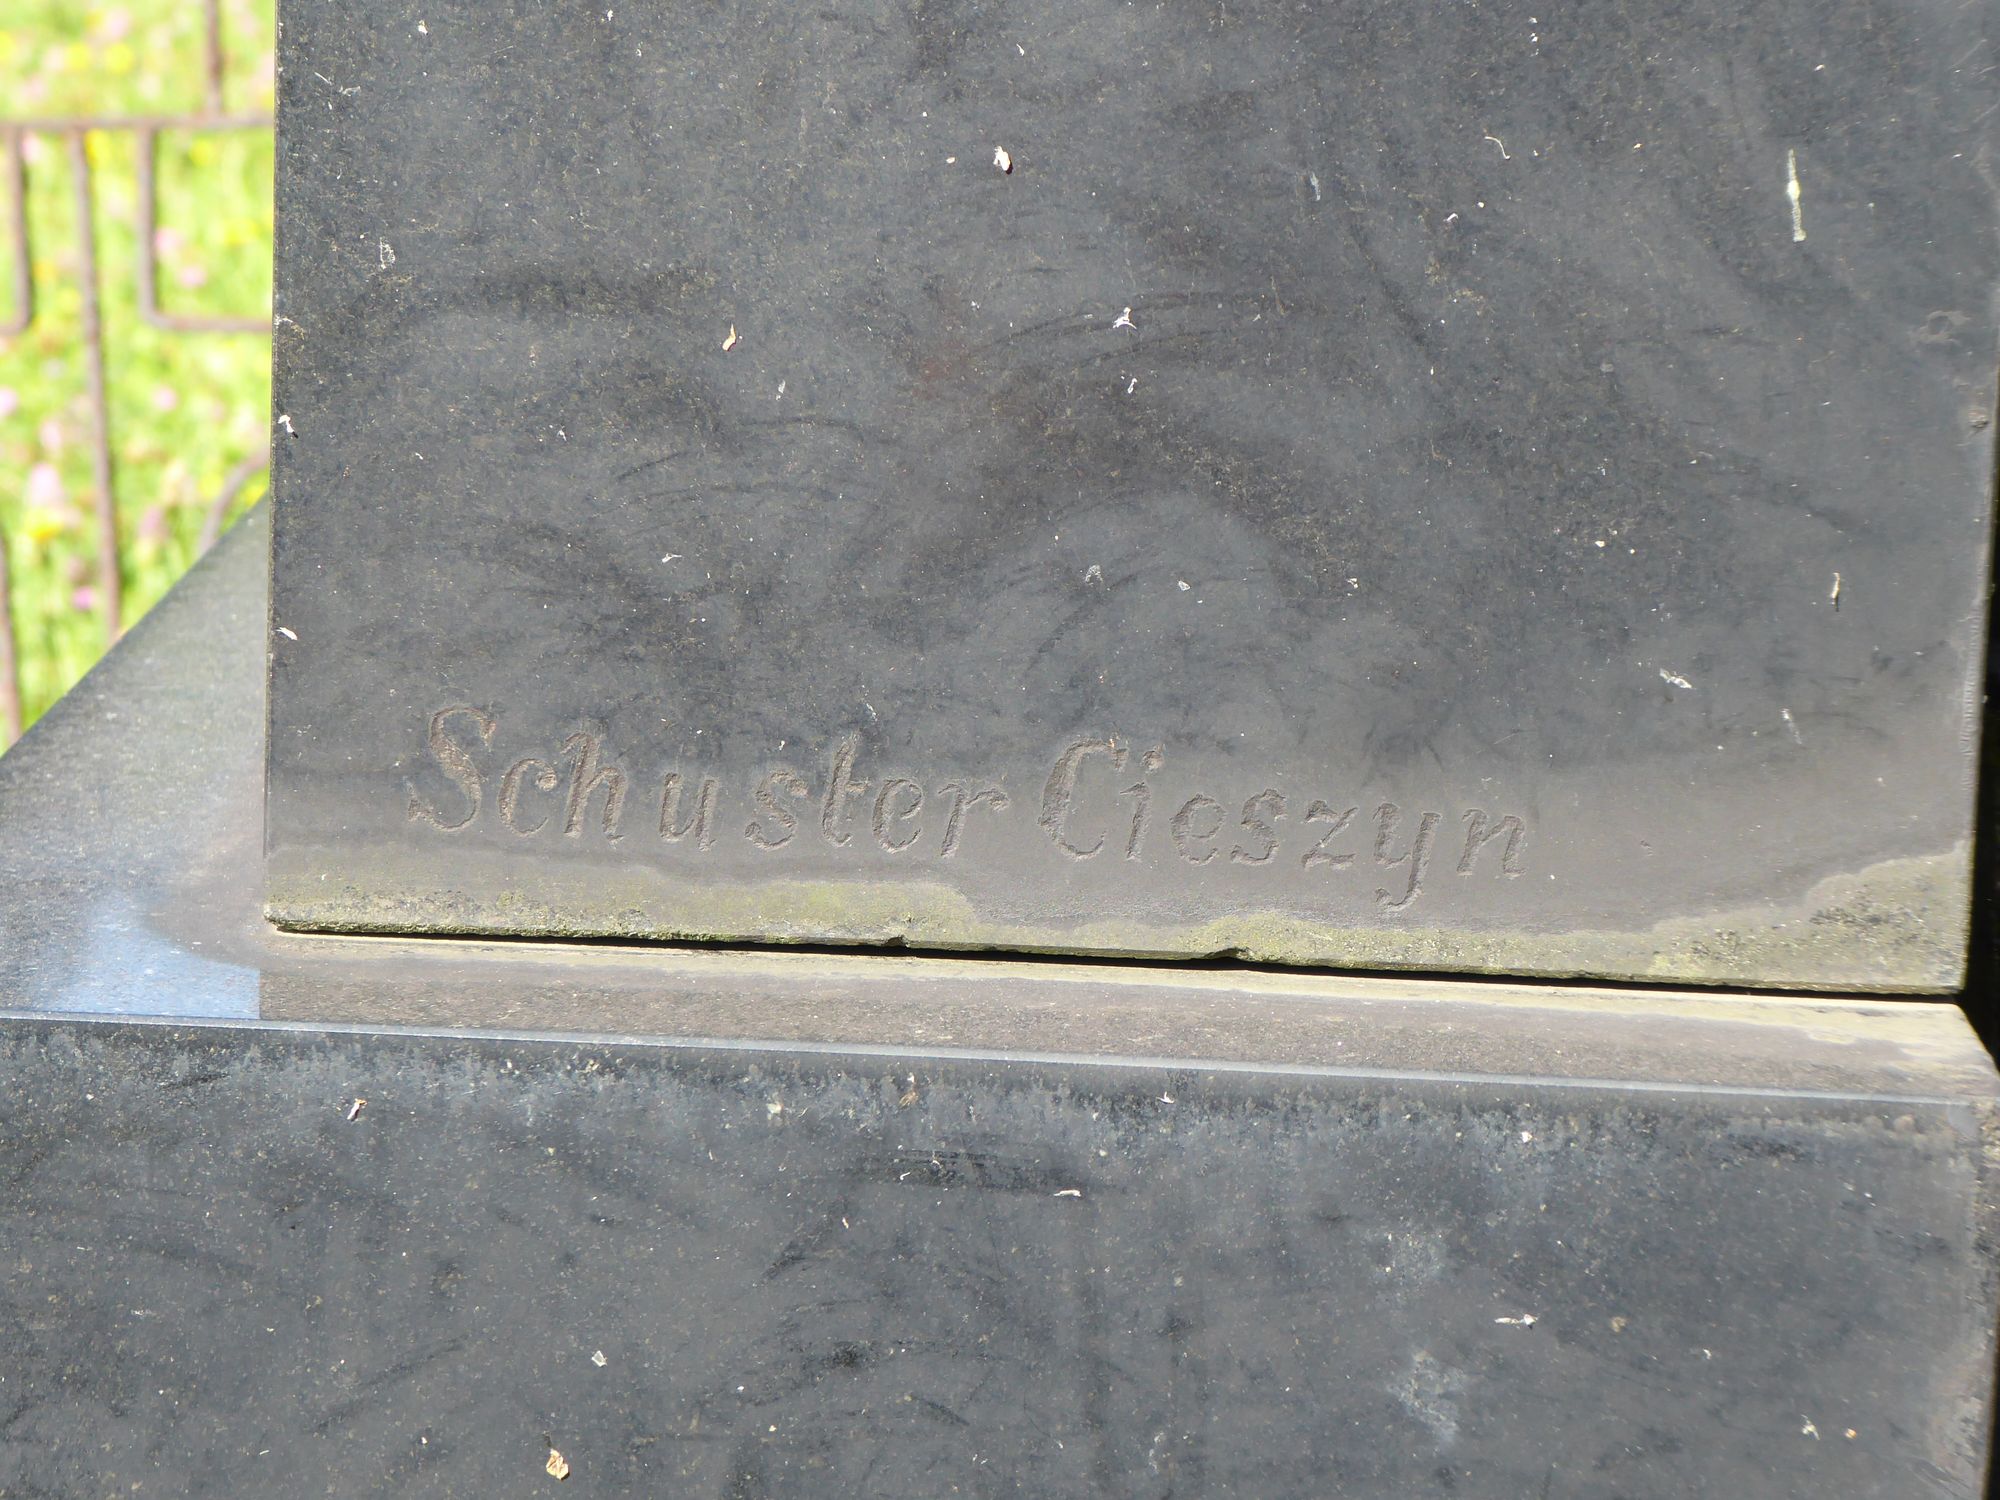 Fragment of the tomb of Adam Cichy, Ewa Cichy, Karol Cichy and Ewa Jurczkowa from the cemetery of the Czech part of Těšín Silesia, as of 2022.